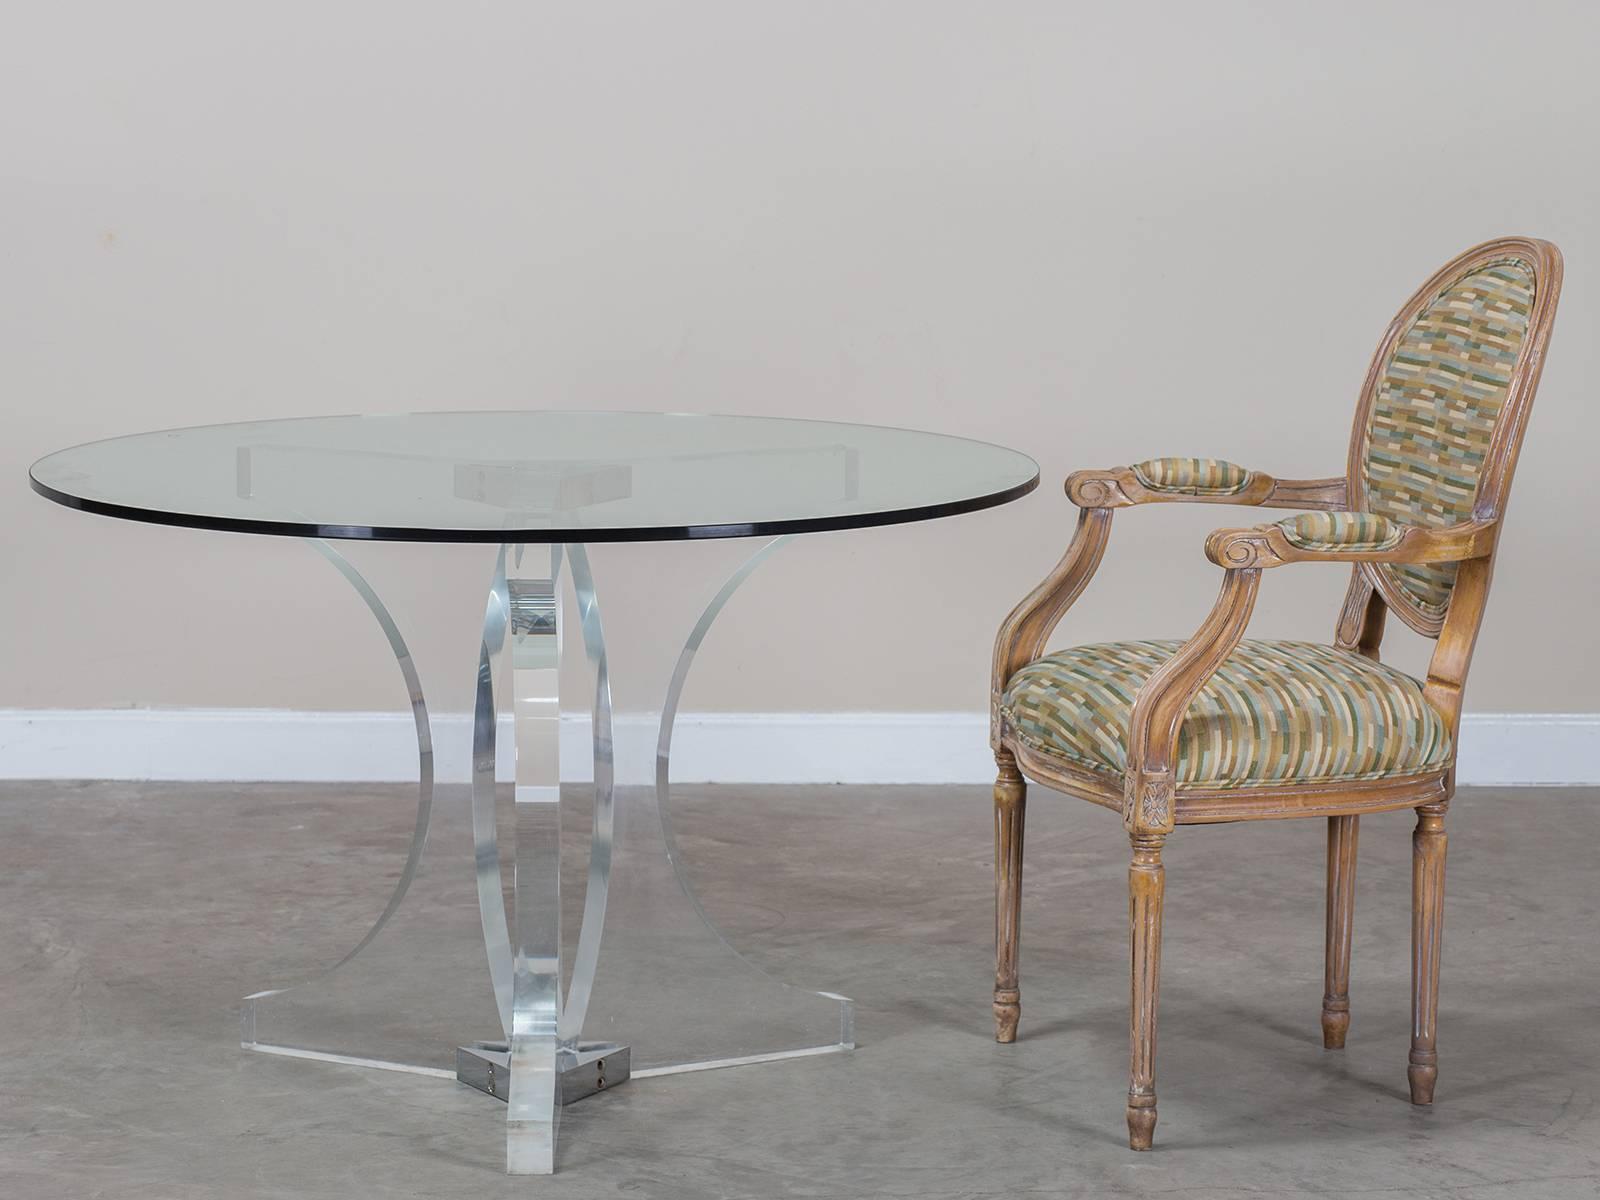 Receive our new selections direct from 1stdibs by email each week. Please click Follow Dealer below and see them first!

The three sections that complete this vintage French Lucite table circa 1970 have a substantial scale as well as an intriguing